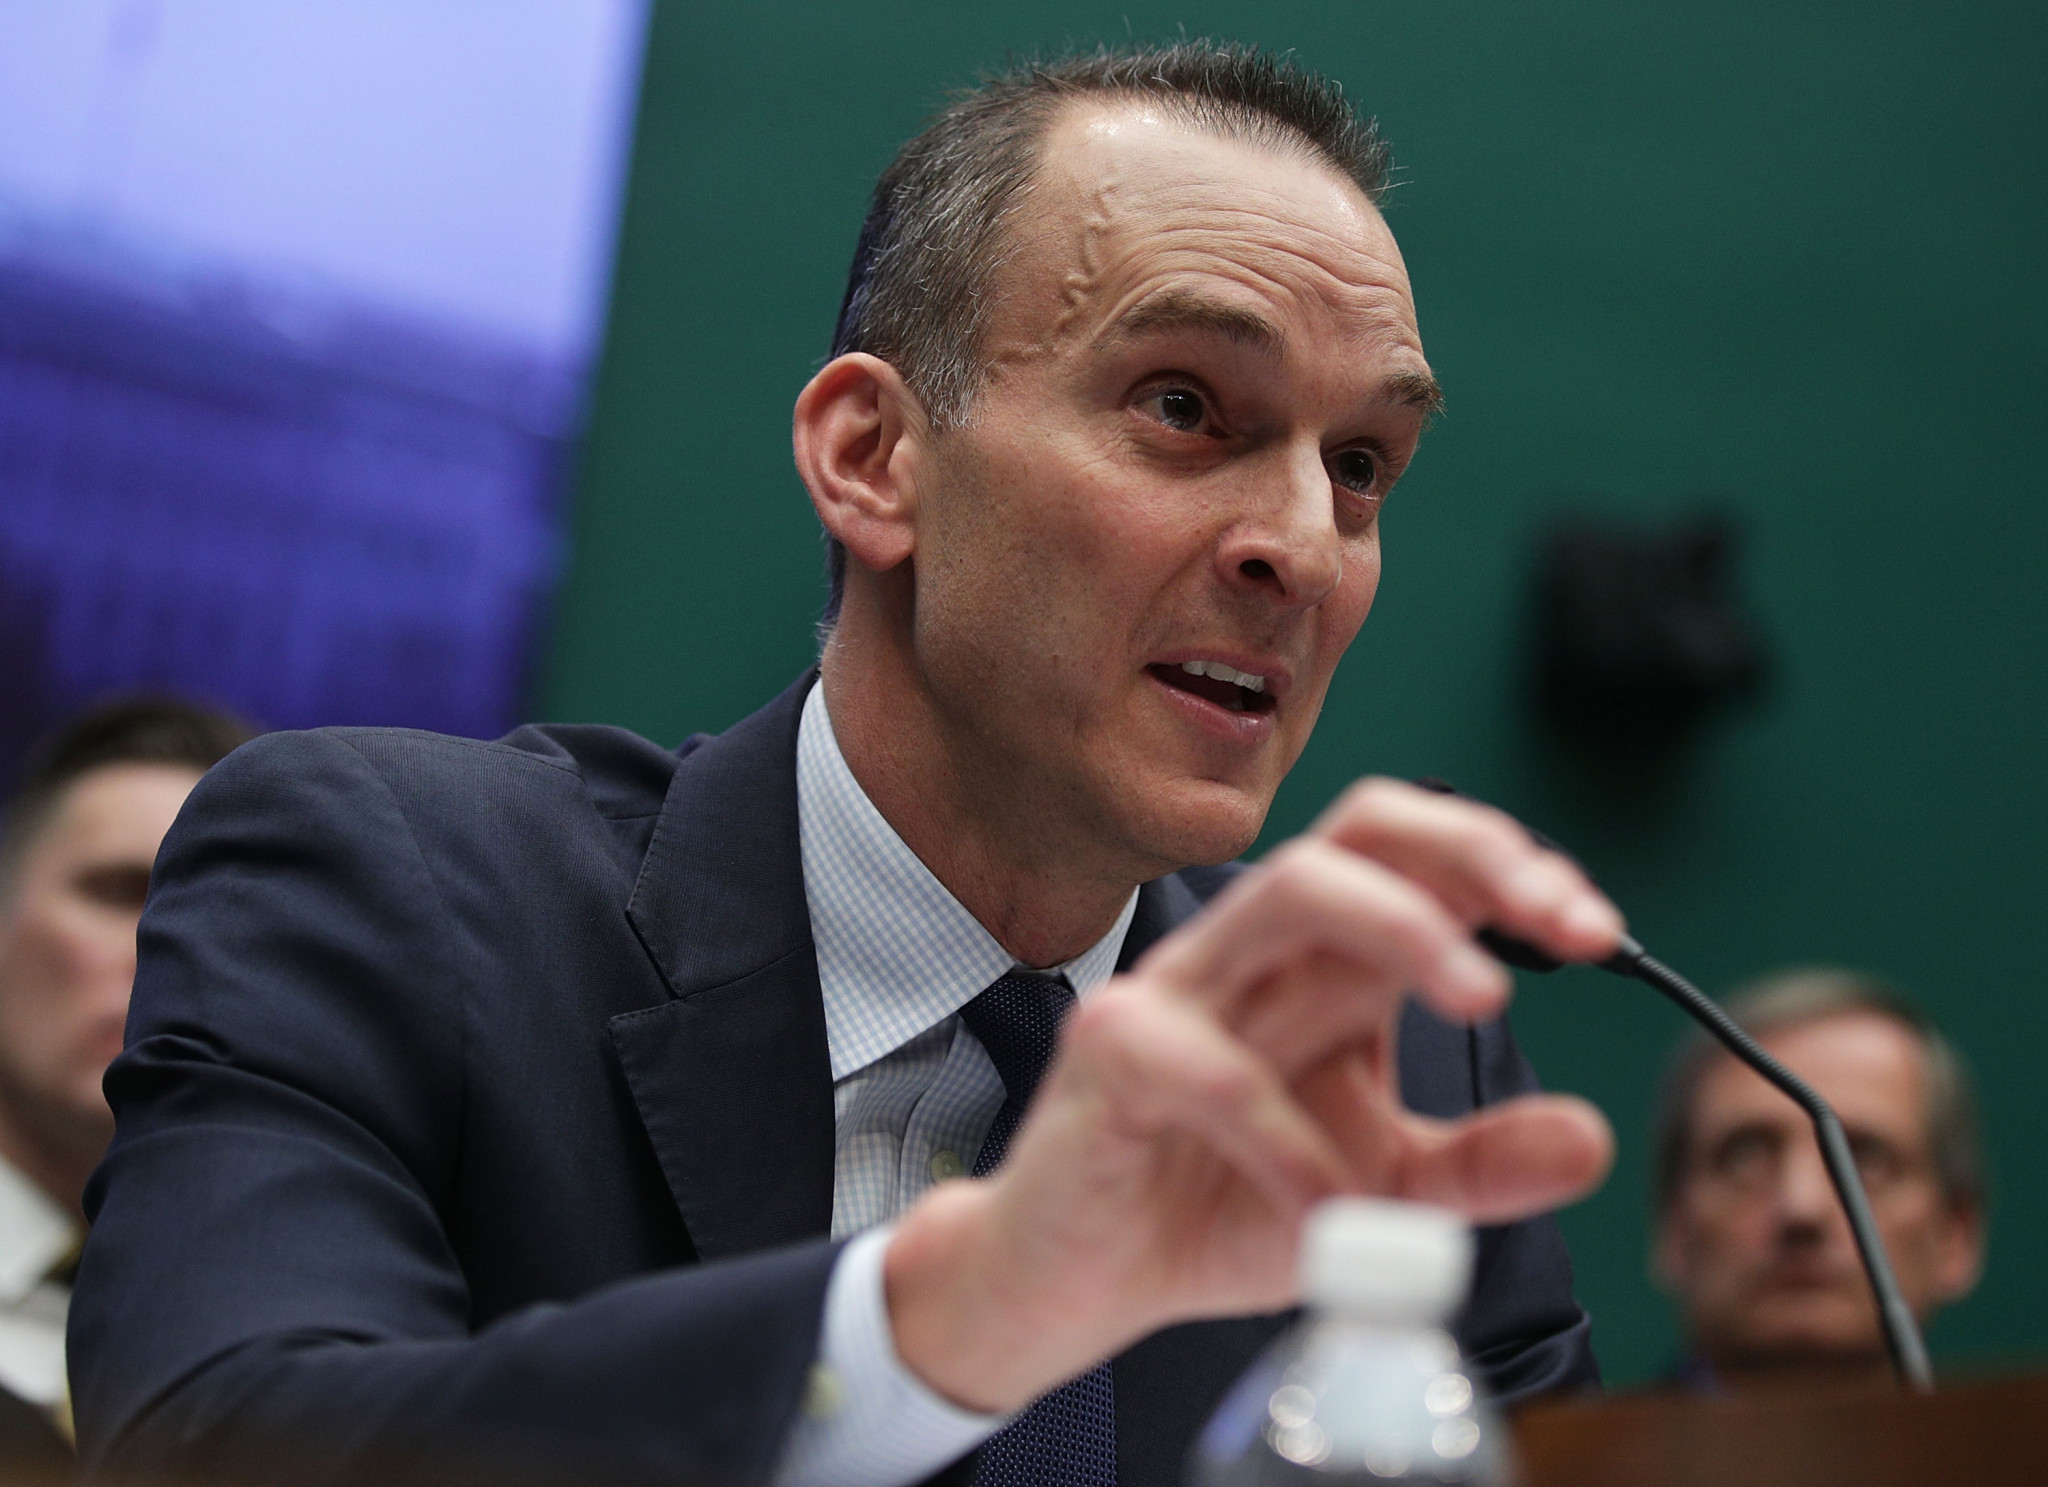 United States Anti-Doping chief executive Travis Tygart has been one of the leading critics of the way sport dealt with the Russian doping scandal and claims they were let off lightly ©Getty Images